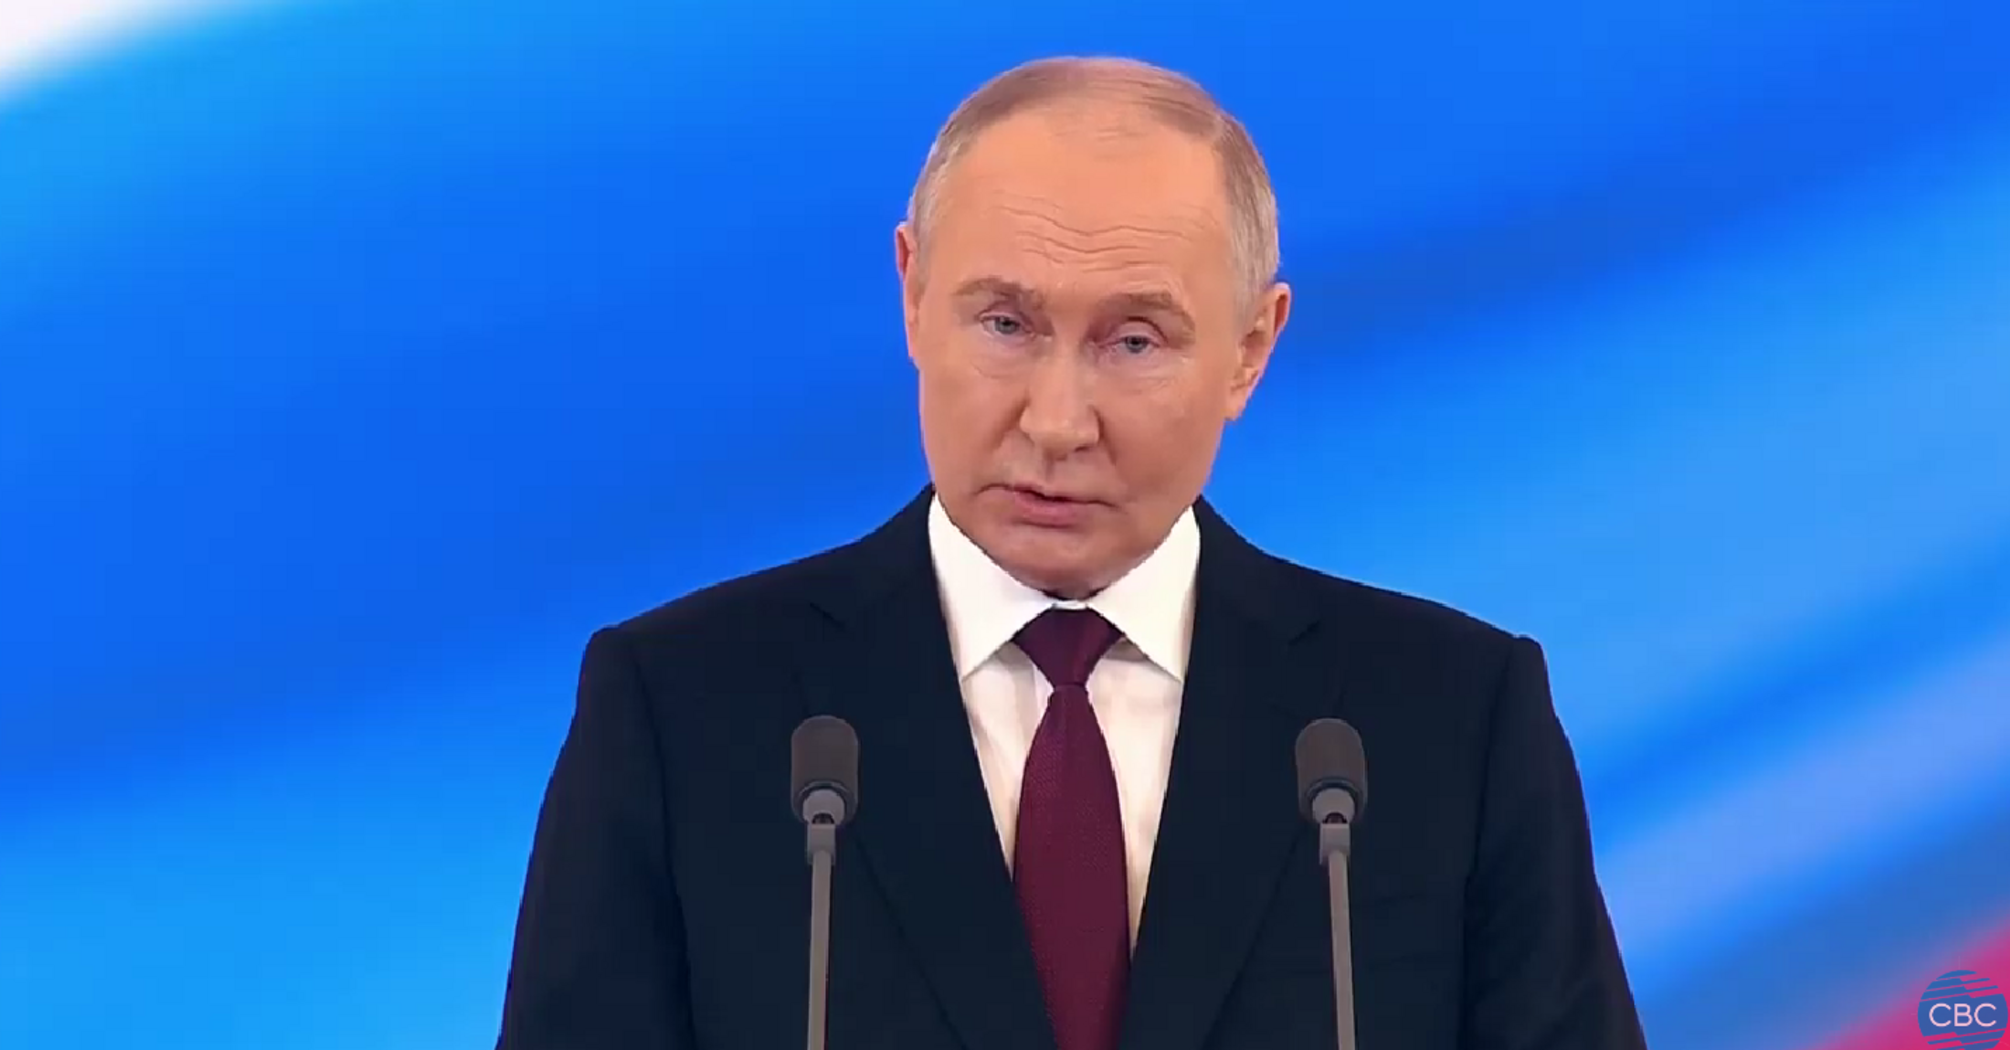 'We will not allow anyone to threaten us': Putin complained about the West and mentioned the 'Special Military Operation' on May 9